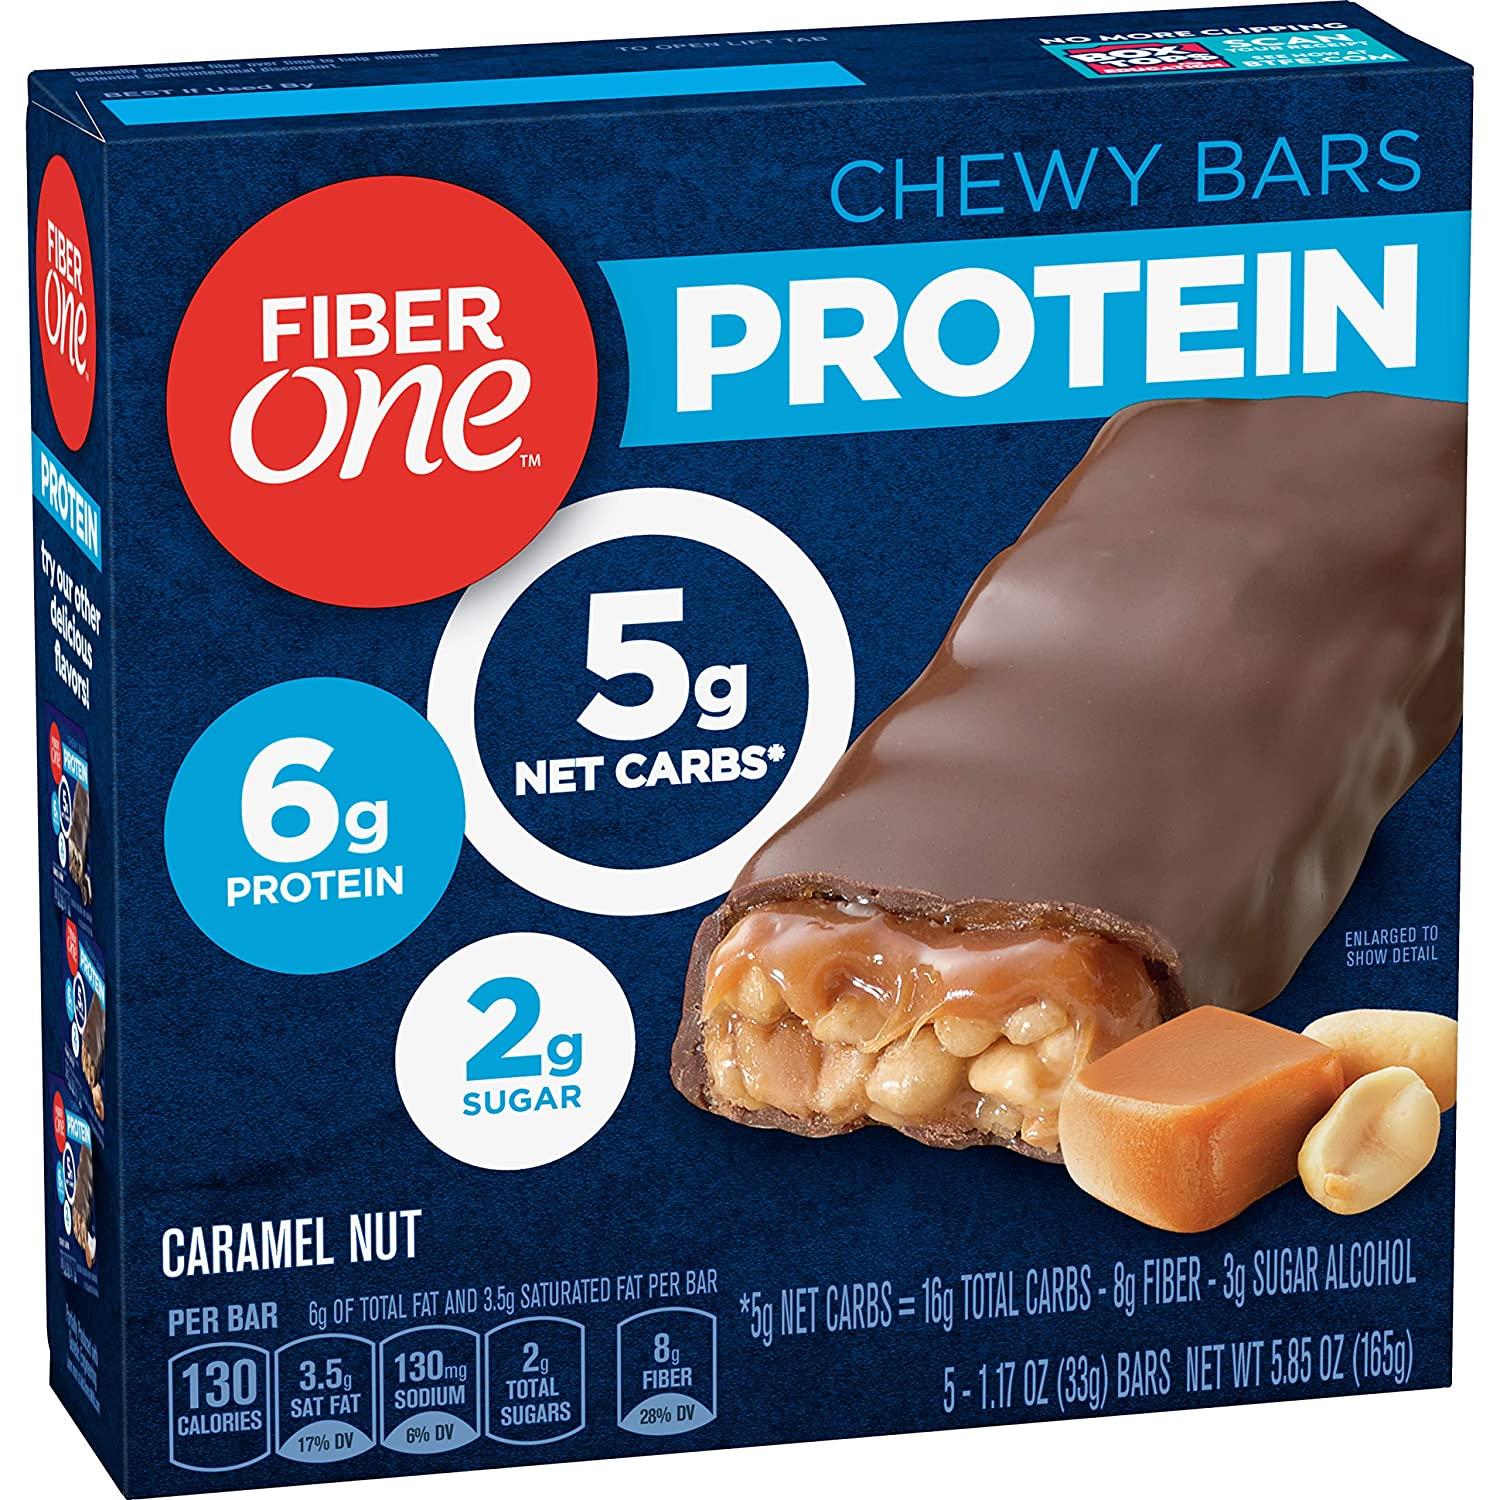 5 Fiber One Protein Chewy Bars for $2.35 Shipped